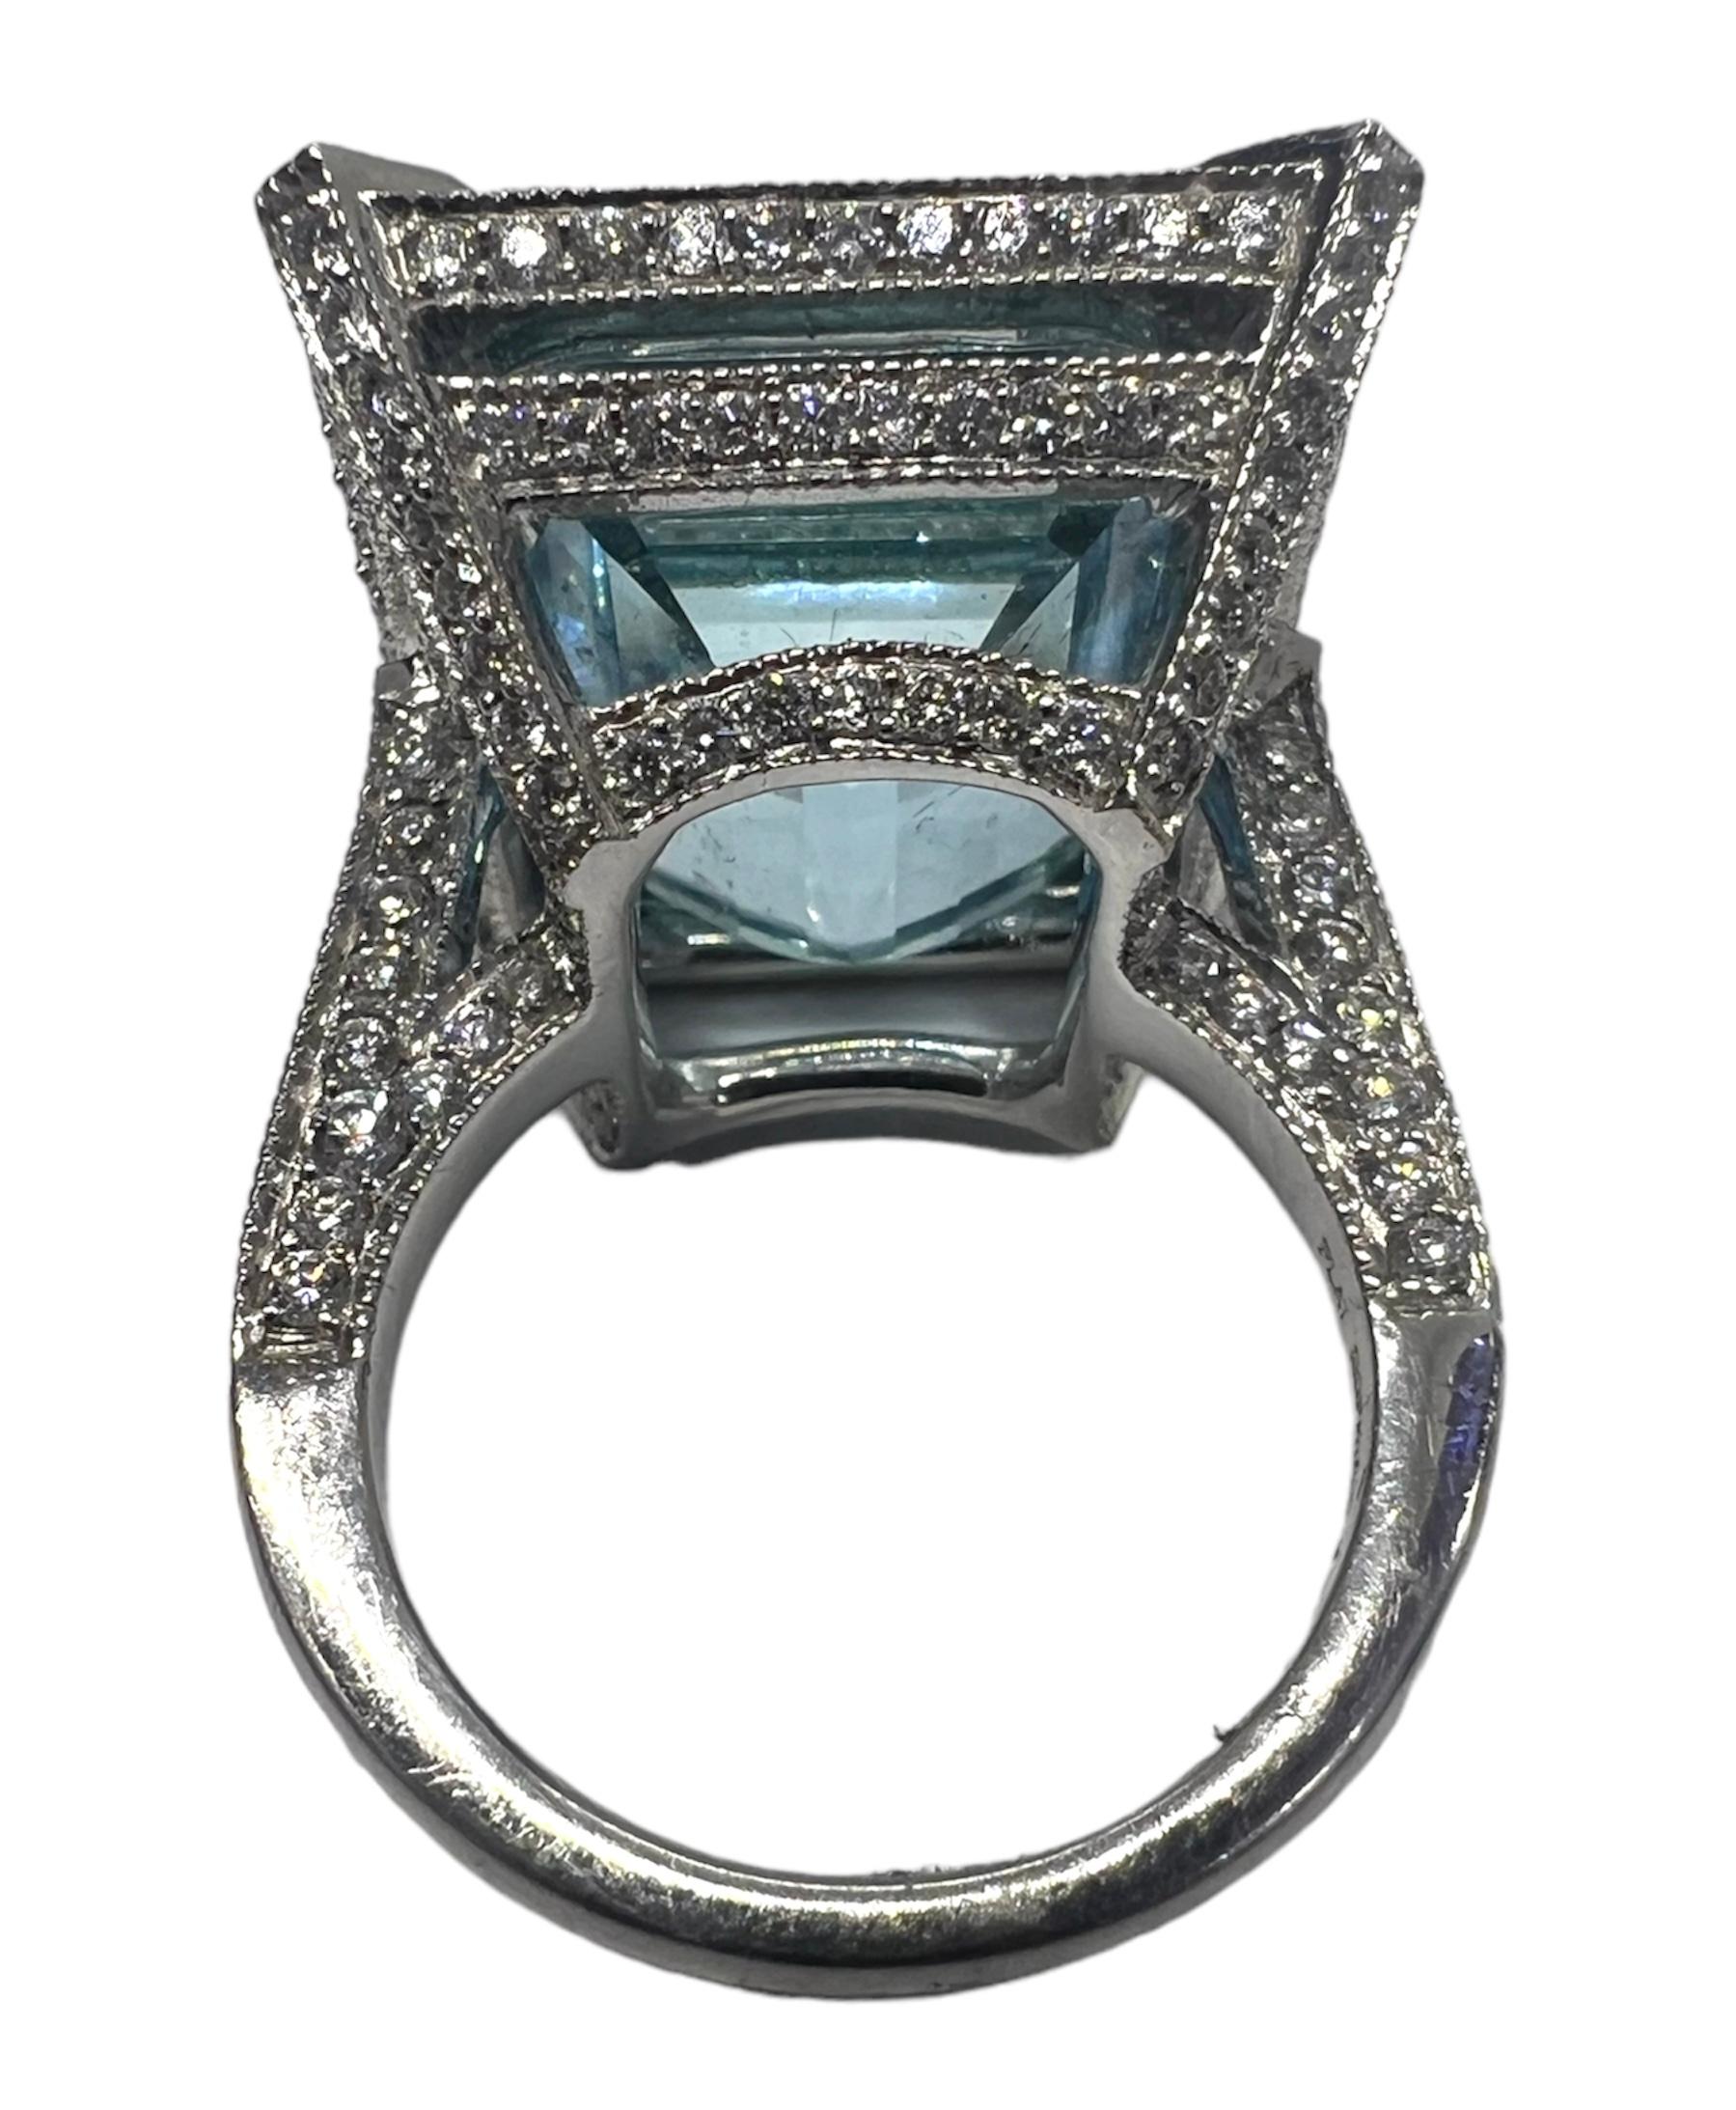 Platinum ring with 20.54 carat aquamarine and 3.52 carat diamond.

Sophia D by Joseph Dardashti LTD has been known worldwide for 35 years and are inspired by classic Art Deco design that merges with modern manufacturing techniques.